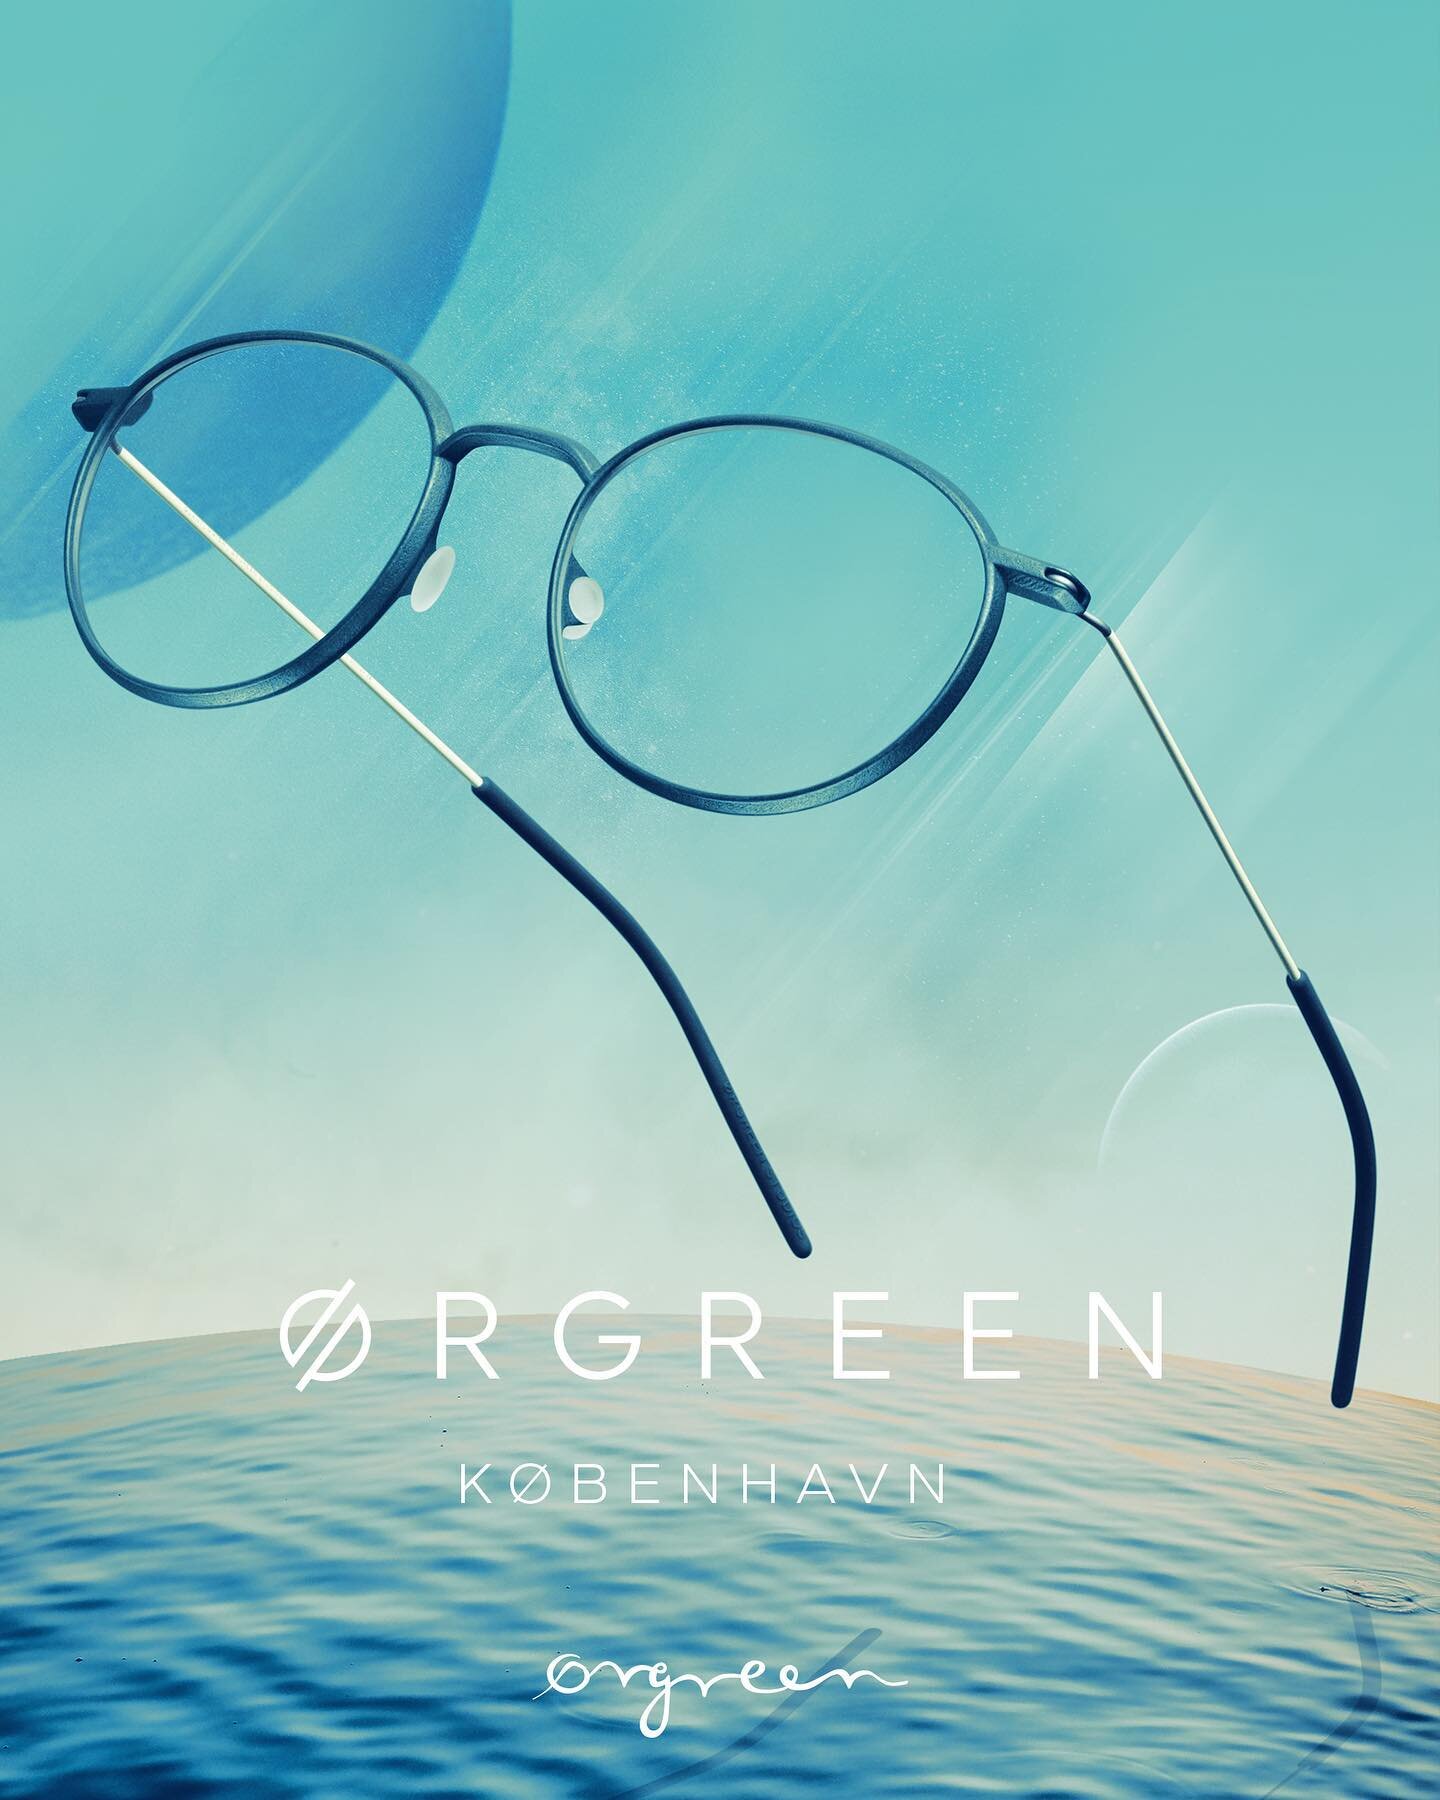 New Logarithm is our panto-shaped unisex frame with a no-nonsense look. Try the Blue Ink + Mat Metallic Blue for a cool down to earth look.